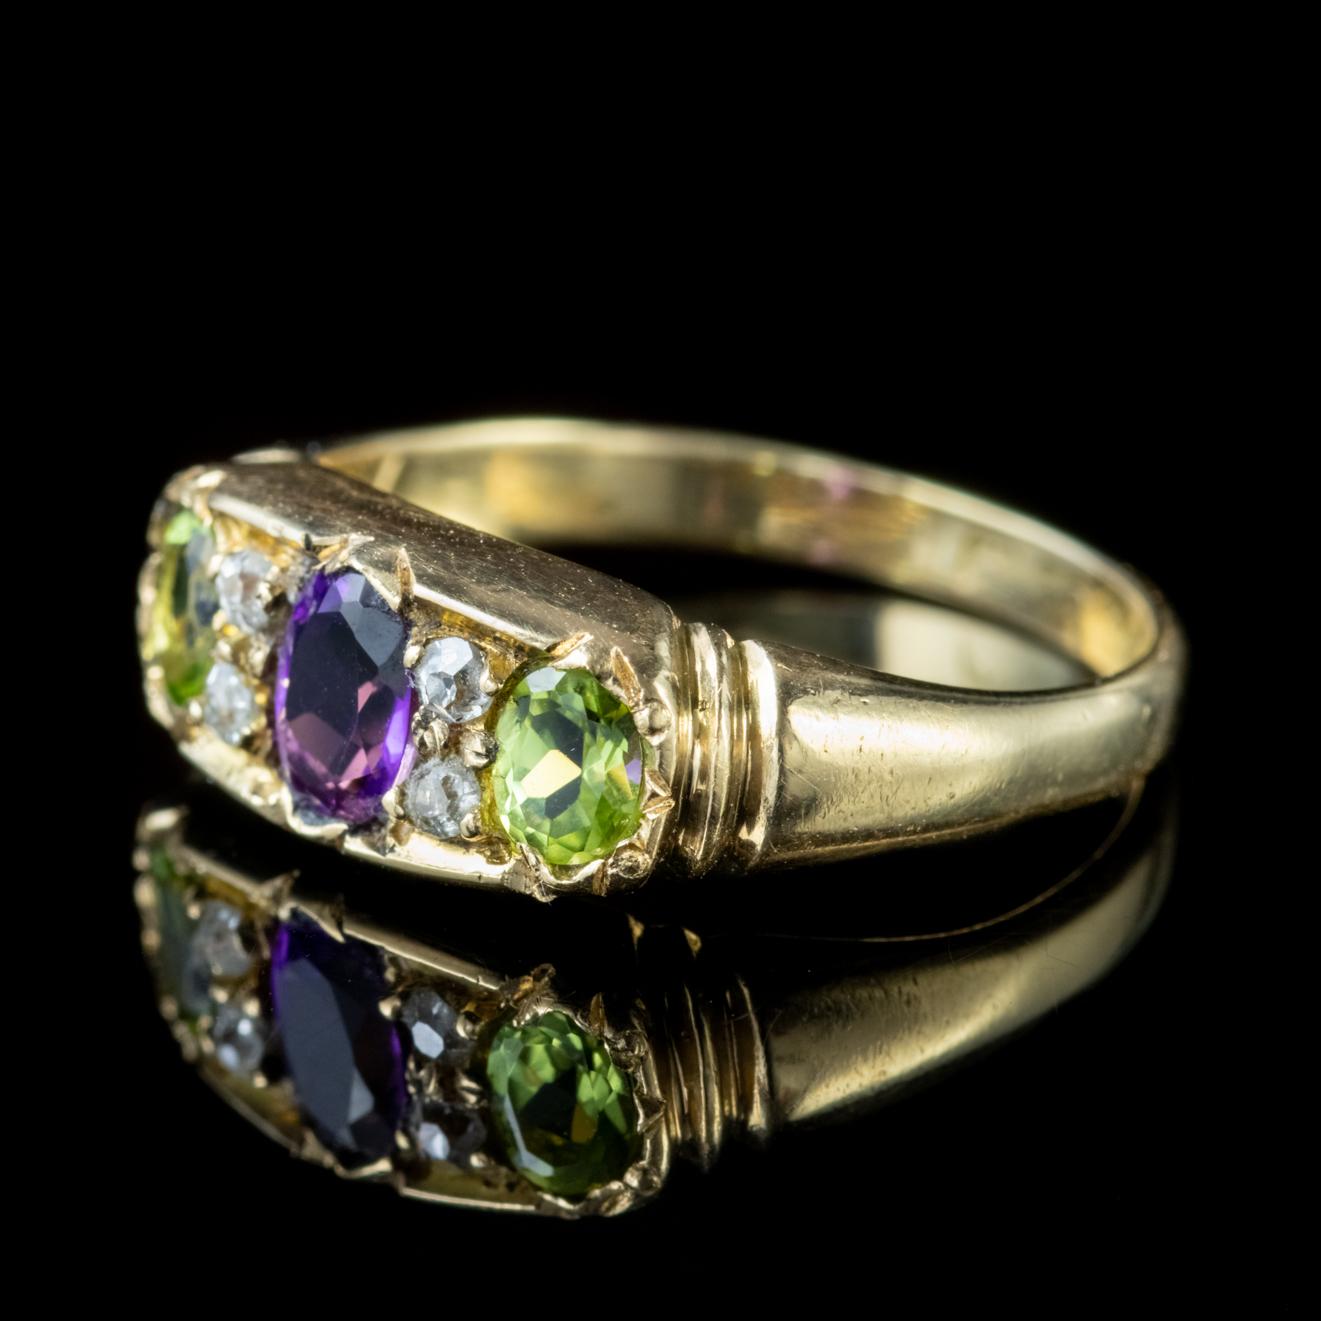 This gorgeous Edwardian Suffragette ring was created during the struggle for women’s rights, and is set with Green, White and Violet stones which carry the message: Green for give, White for women, and Violet for votes.

The central 0.25ct Amethyst